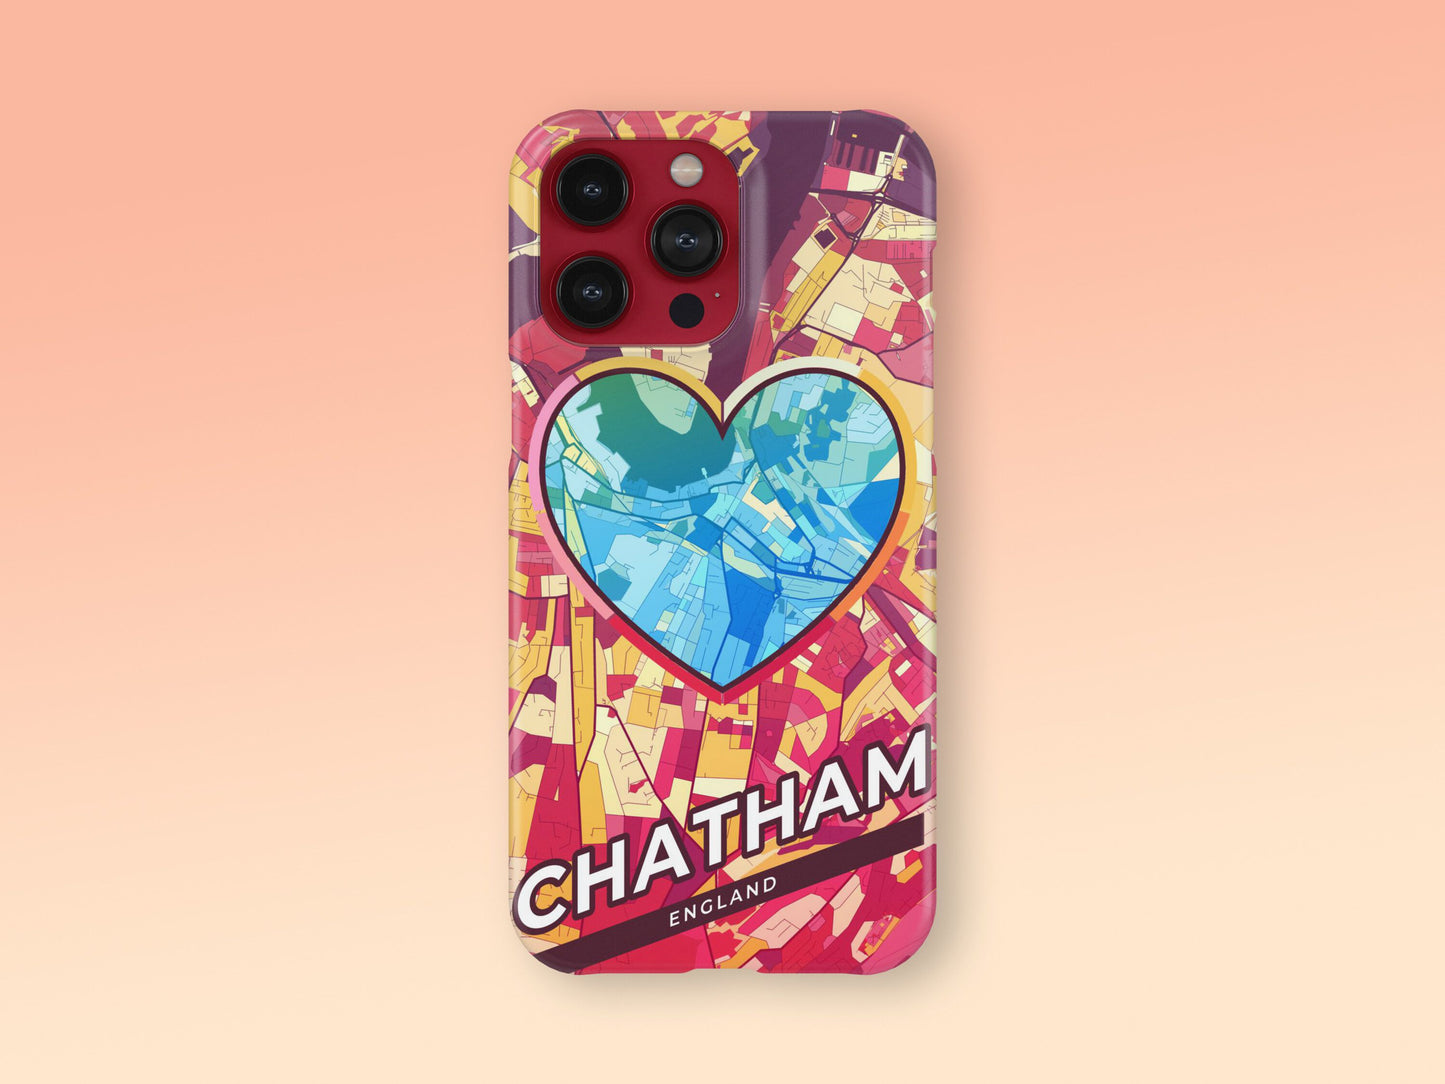 Chatham England slim phone case with colorful icon. Birthday, wedding or housewarming gift. Couple match cases. 2